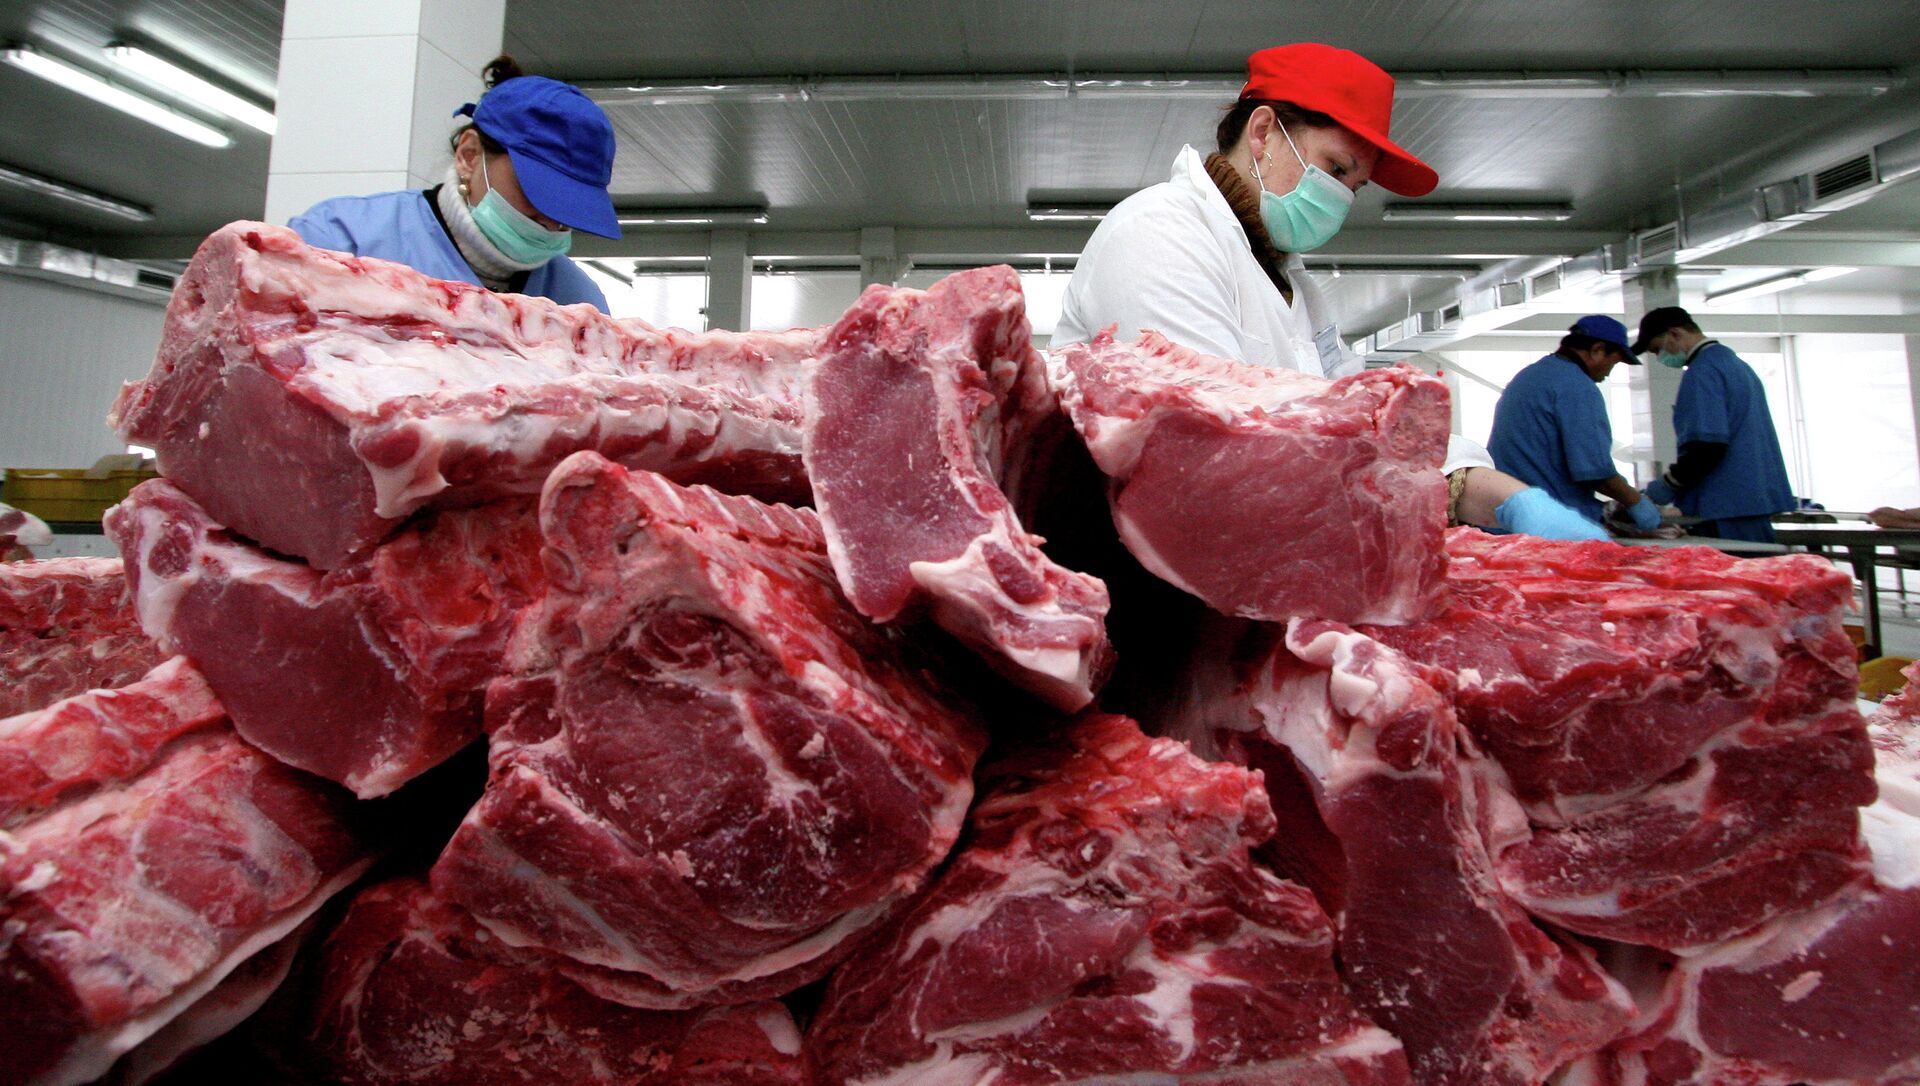 Russia Bans Meat Imports From Montenegro Over Re-export From EU: Watchdog - Sputnik Молдова, 1920, 25.05.2021